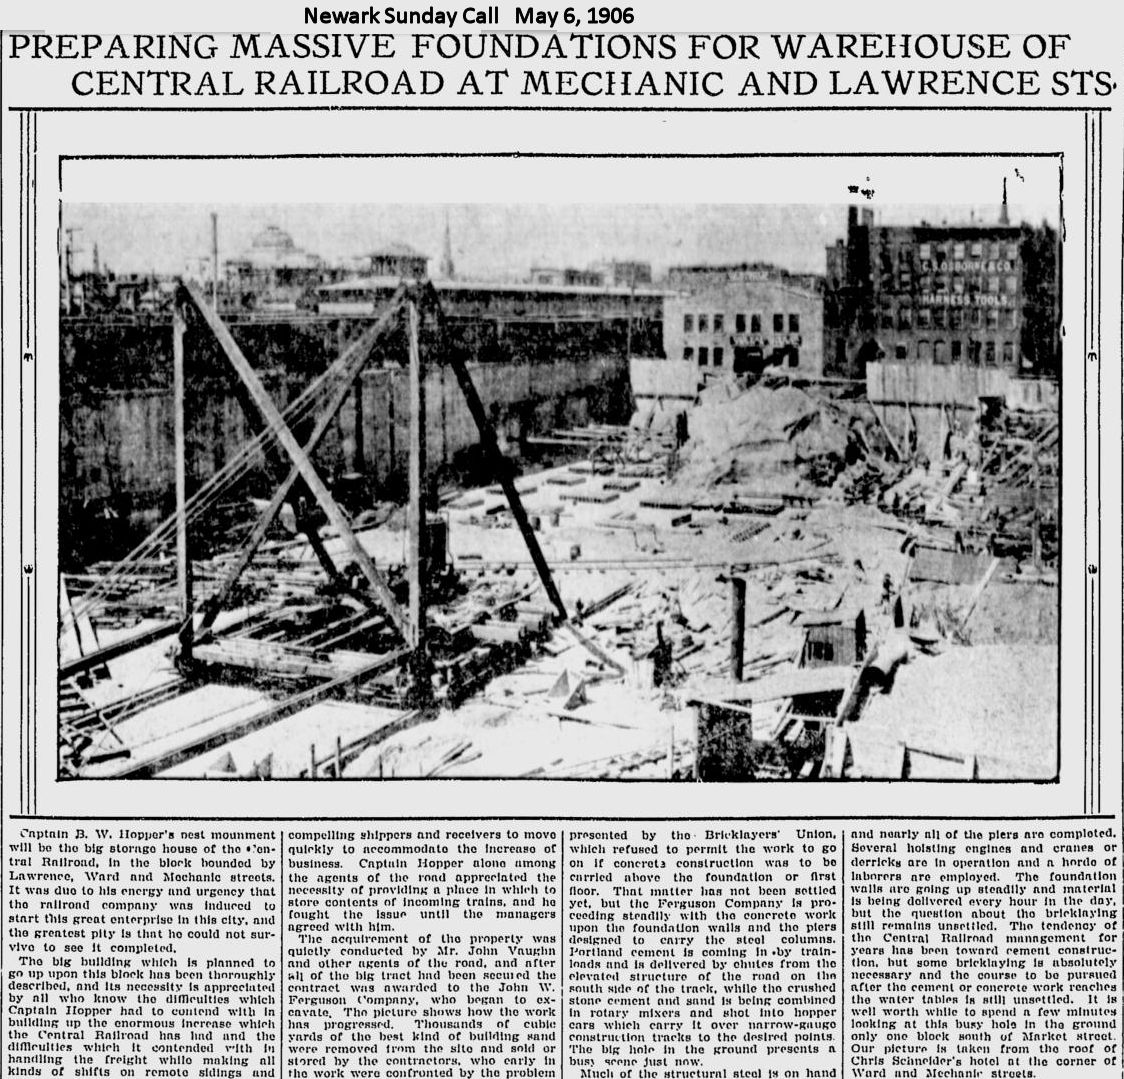 Preparing Massive Foundations for Warehouse of Central Railroad at Mechanic and Lawrence Streets
May 6, 1906
